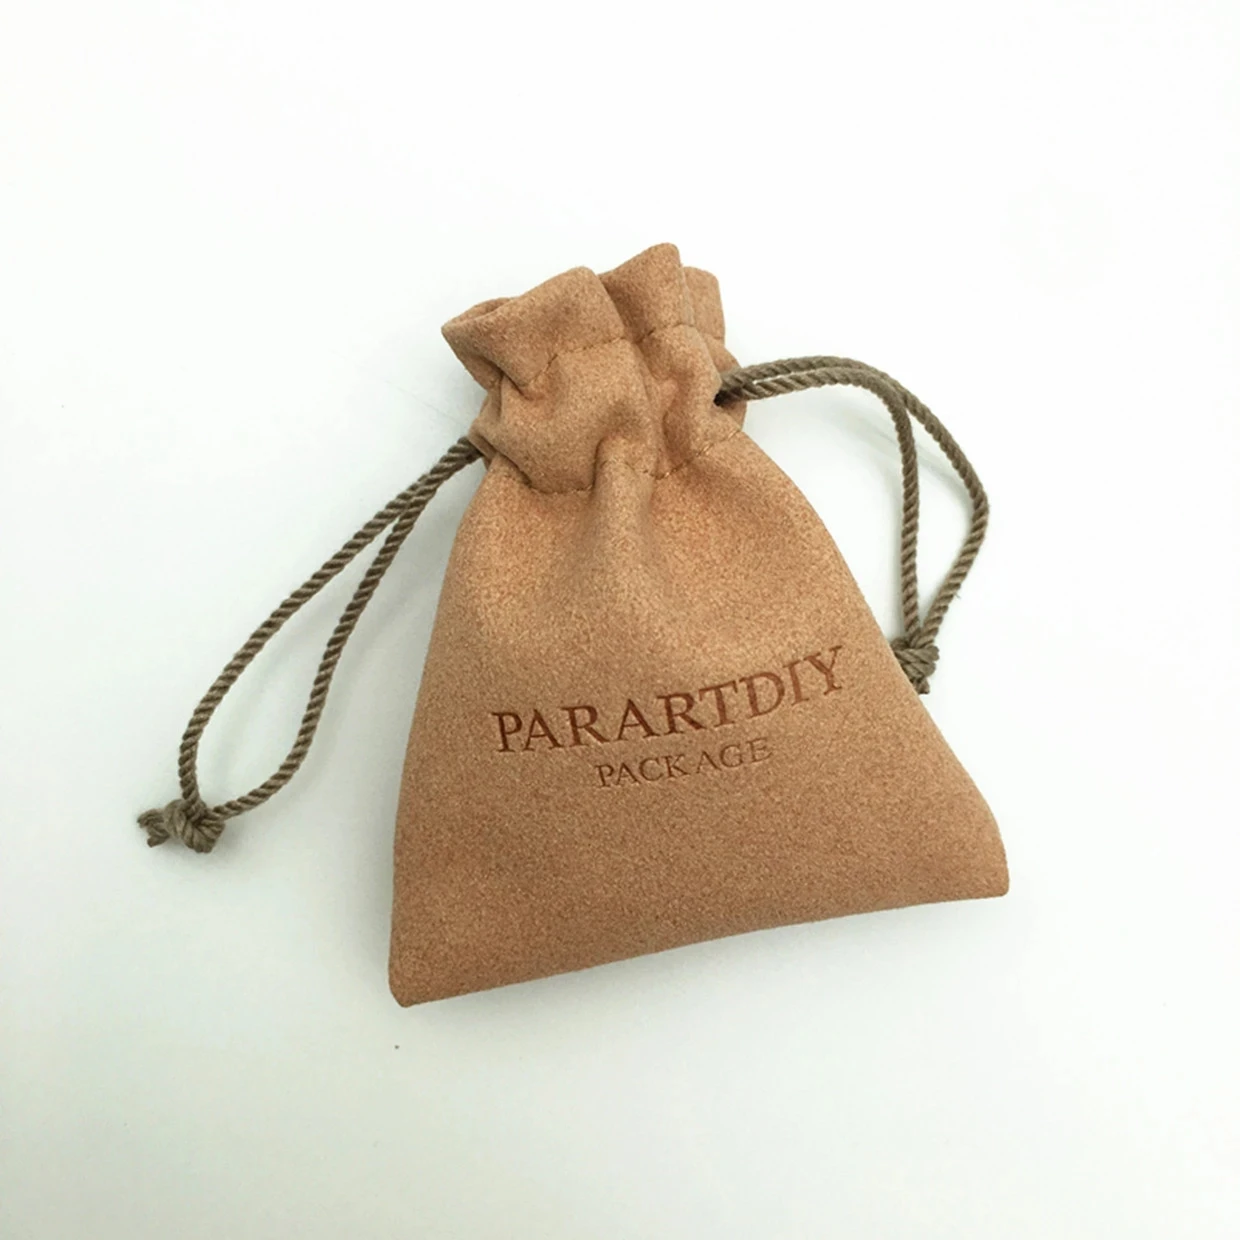 50pcs microfiber personalized color logo drawstring bags custom bags jewelry bags necklace bags packaging bags